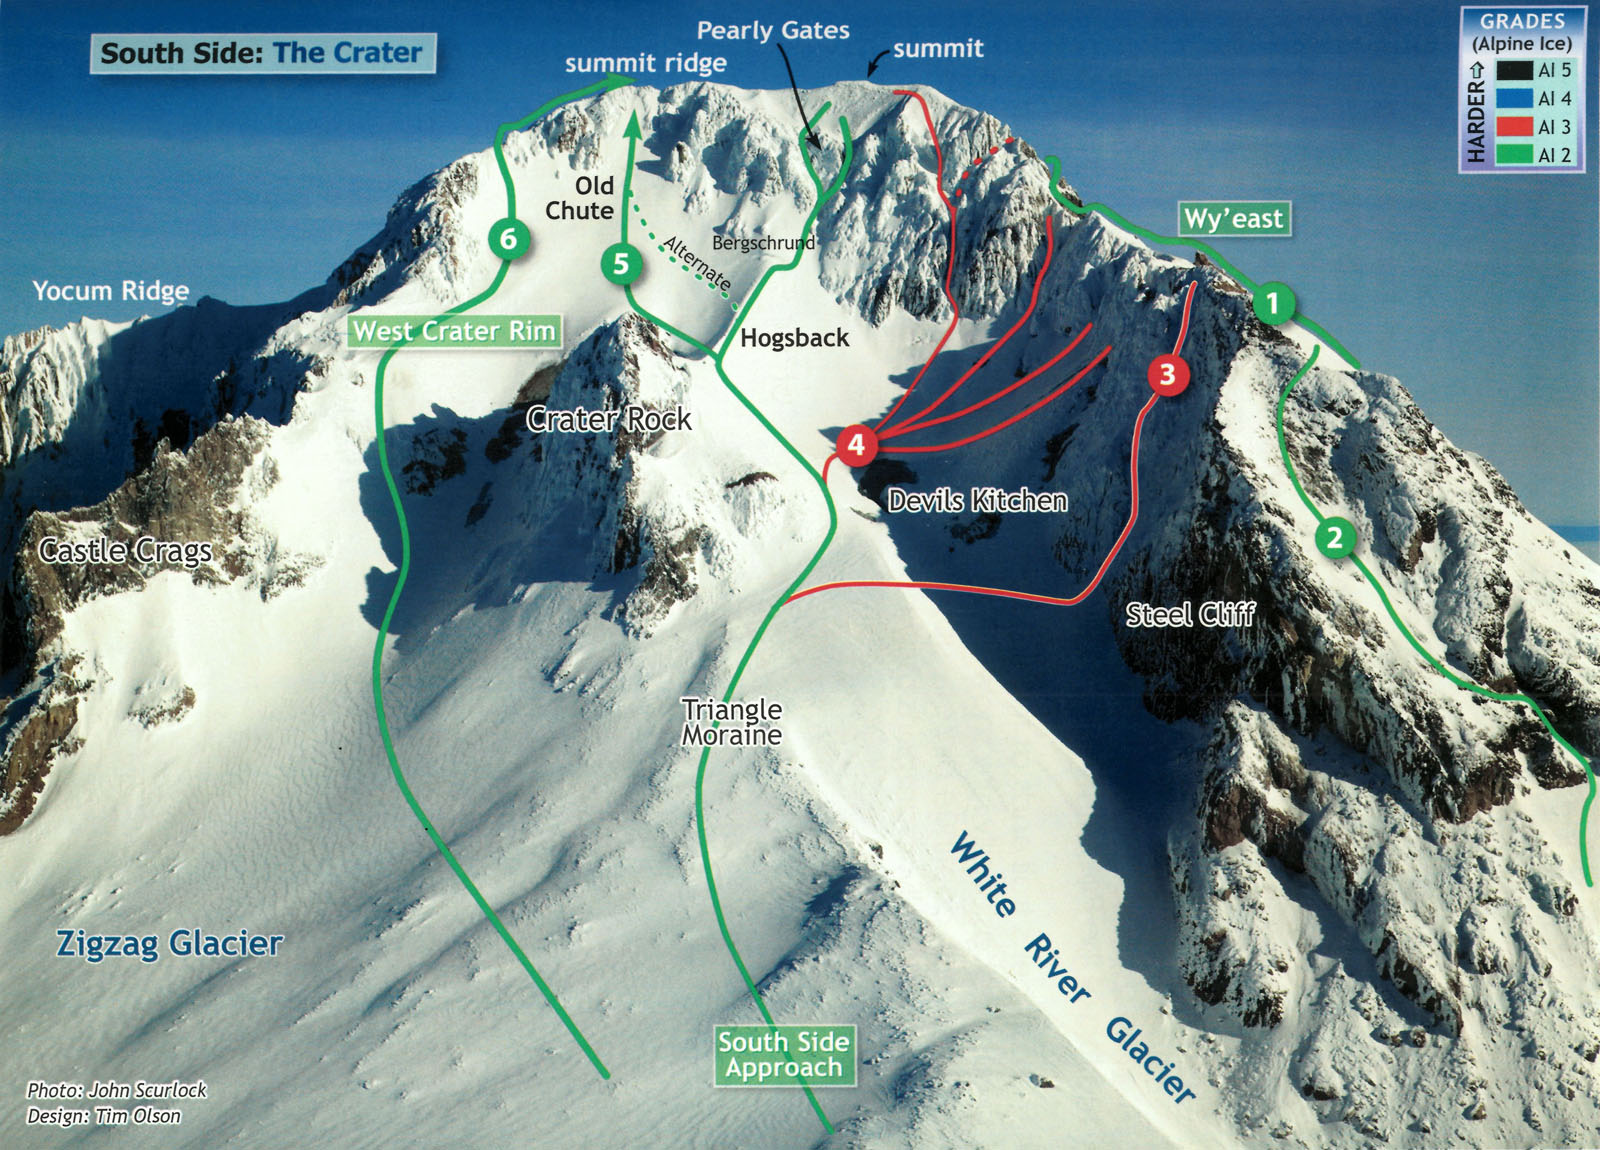 Image credit: Mt Hood Climber's Guide by Bill Mullee